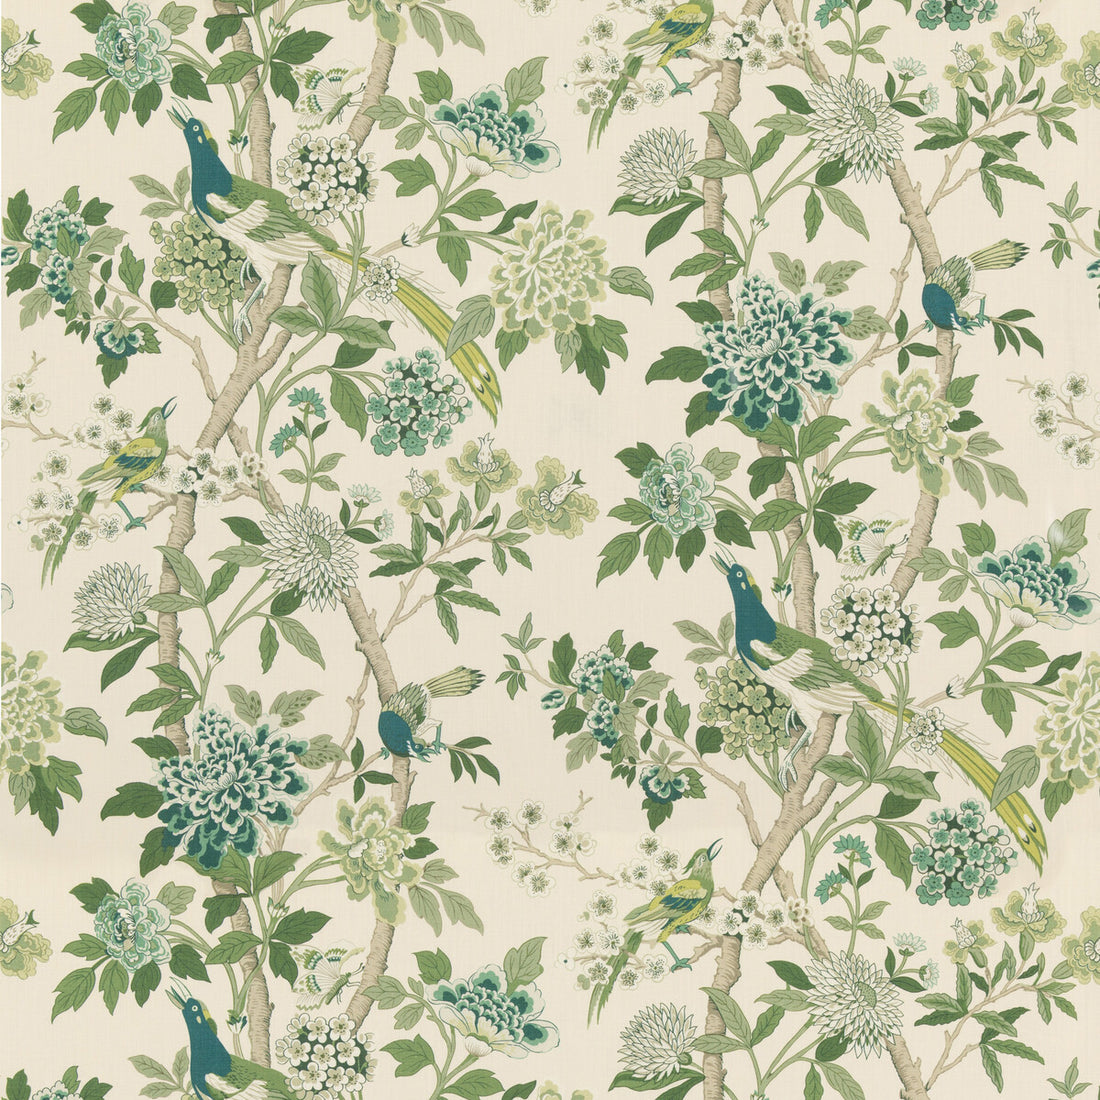 Hydrangea Bird - Archive fabric in green color - pattern BP10851.2.0 - by G P &amp; J Baker in the Chifu collection